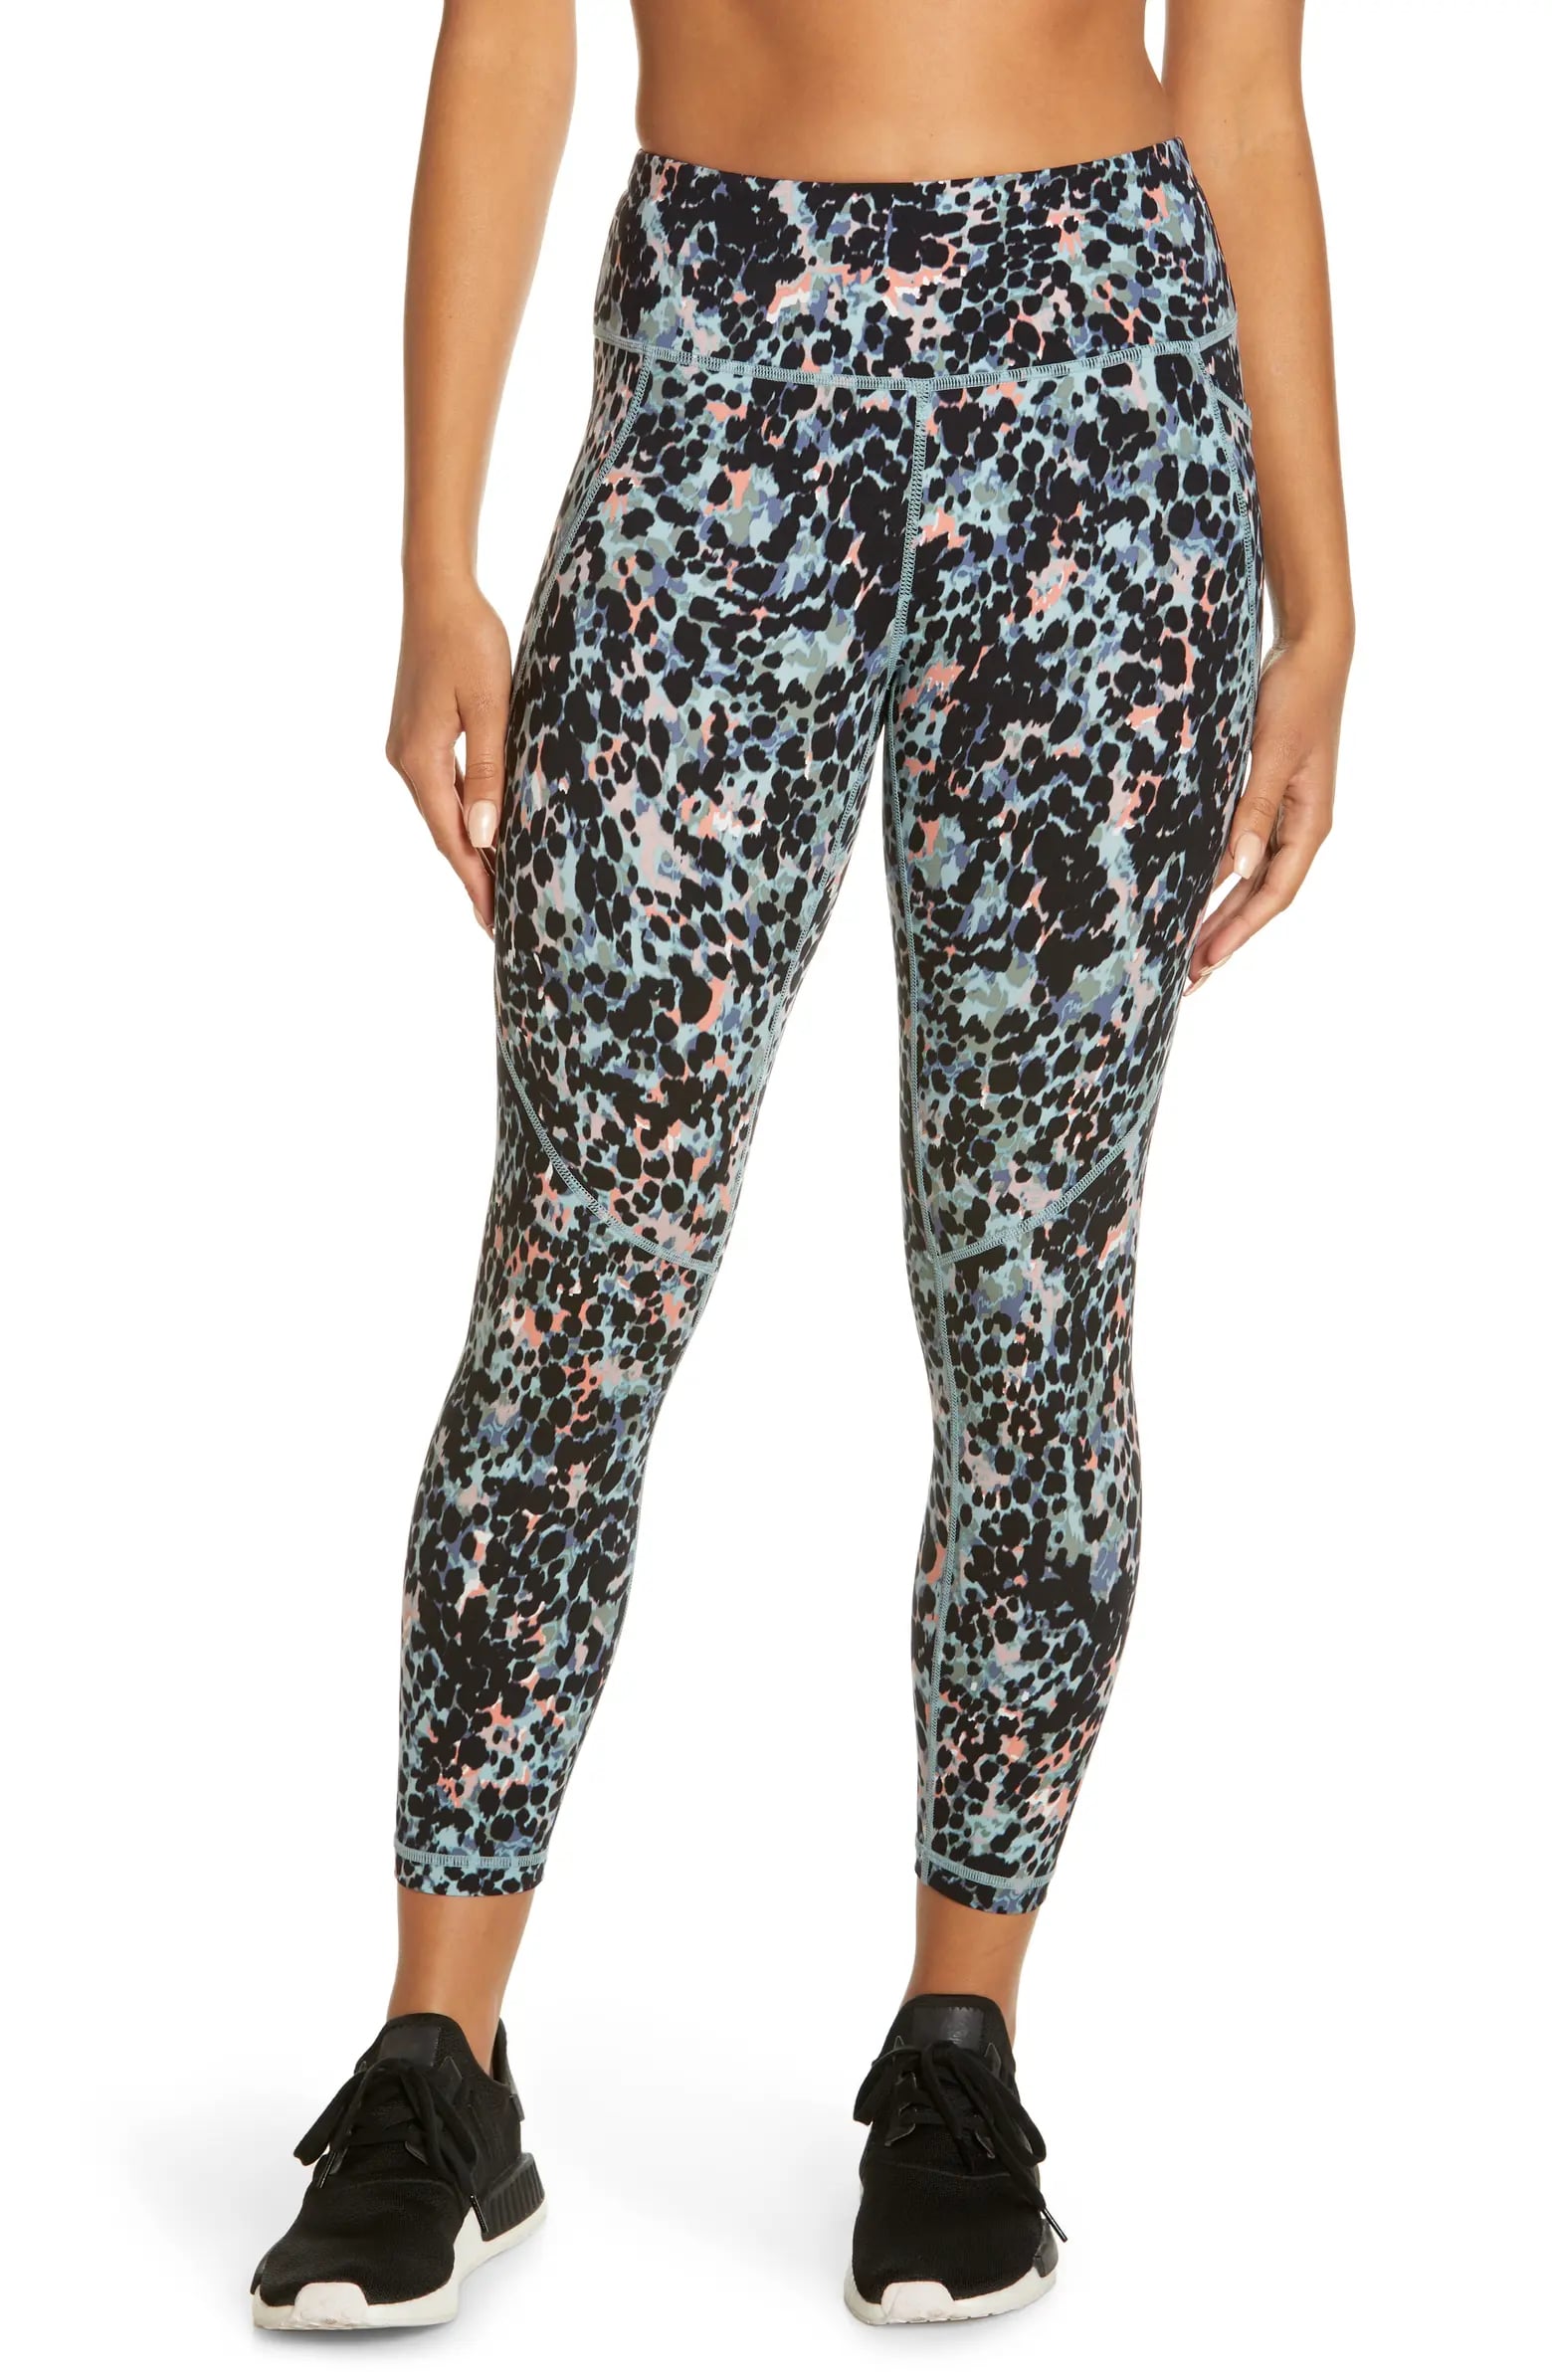 Leggings: Sweaty Betty Power Pocket Workout Leggings, 32 Workout Clothing  Deals Worth Shopping From the Nordstrom Anniversary Sale